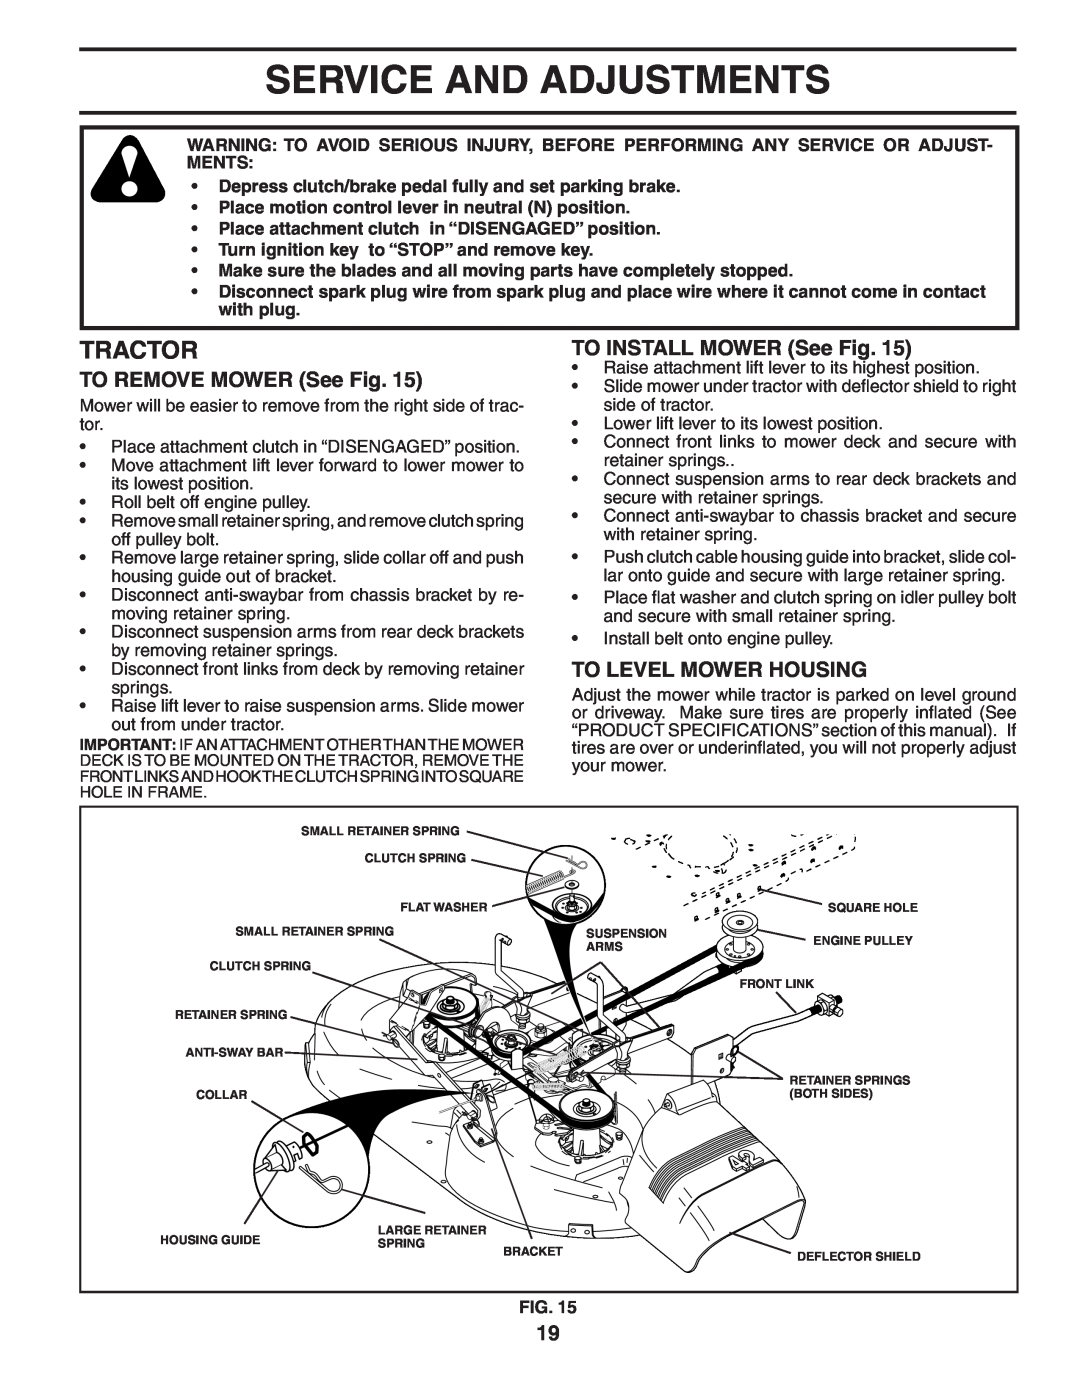 Poulan PB18H42LT manual Service And Adjustments, TO REMOVE MOWER See Fig, TO INSTALL MOWER See Fig, To Level Mower Housing 